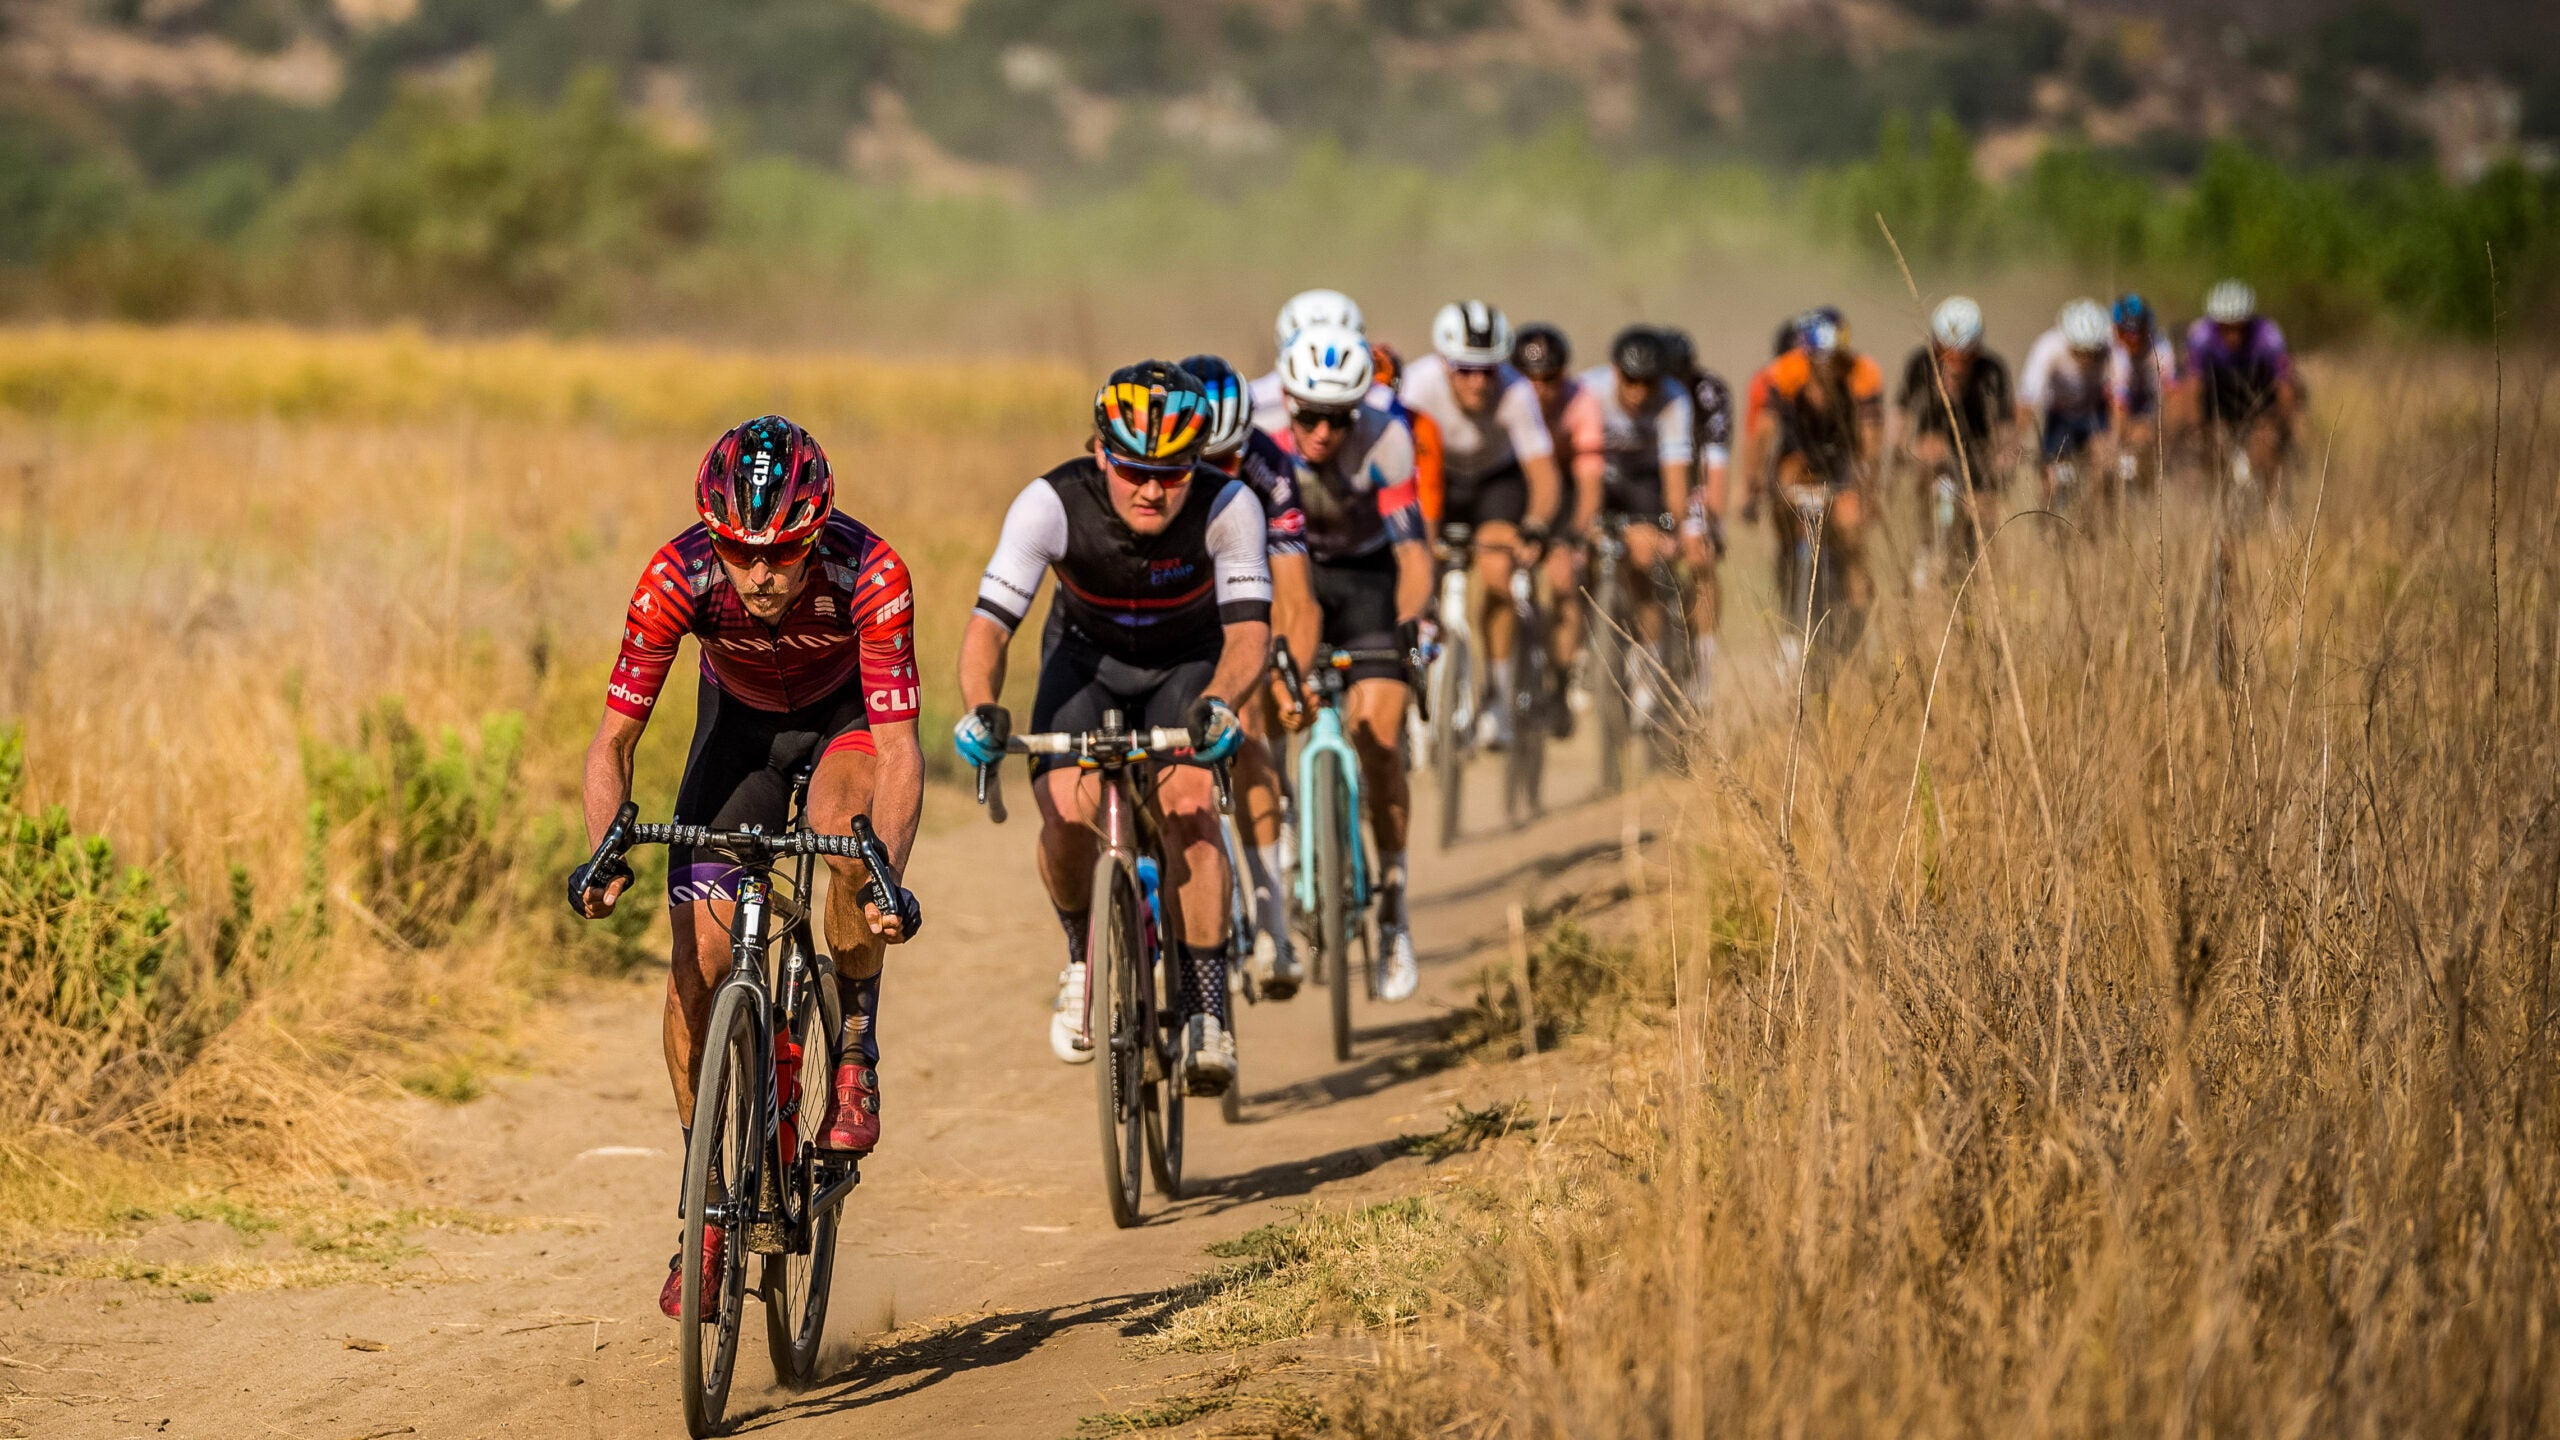 Everything You Always Wanted to Know About Gravel Cycling (But Were Afraid to Ask)